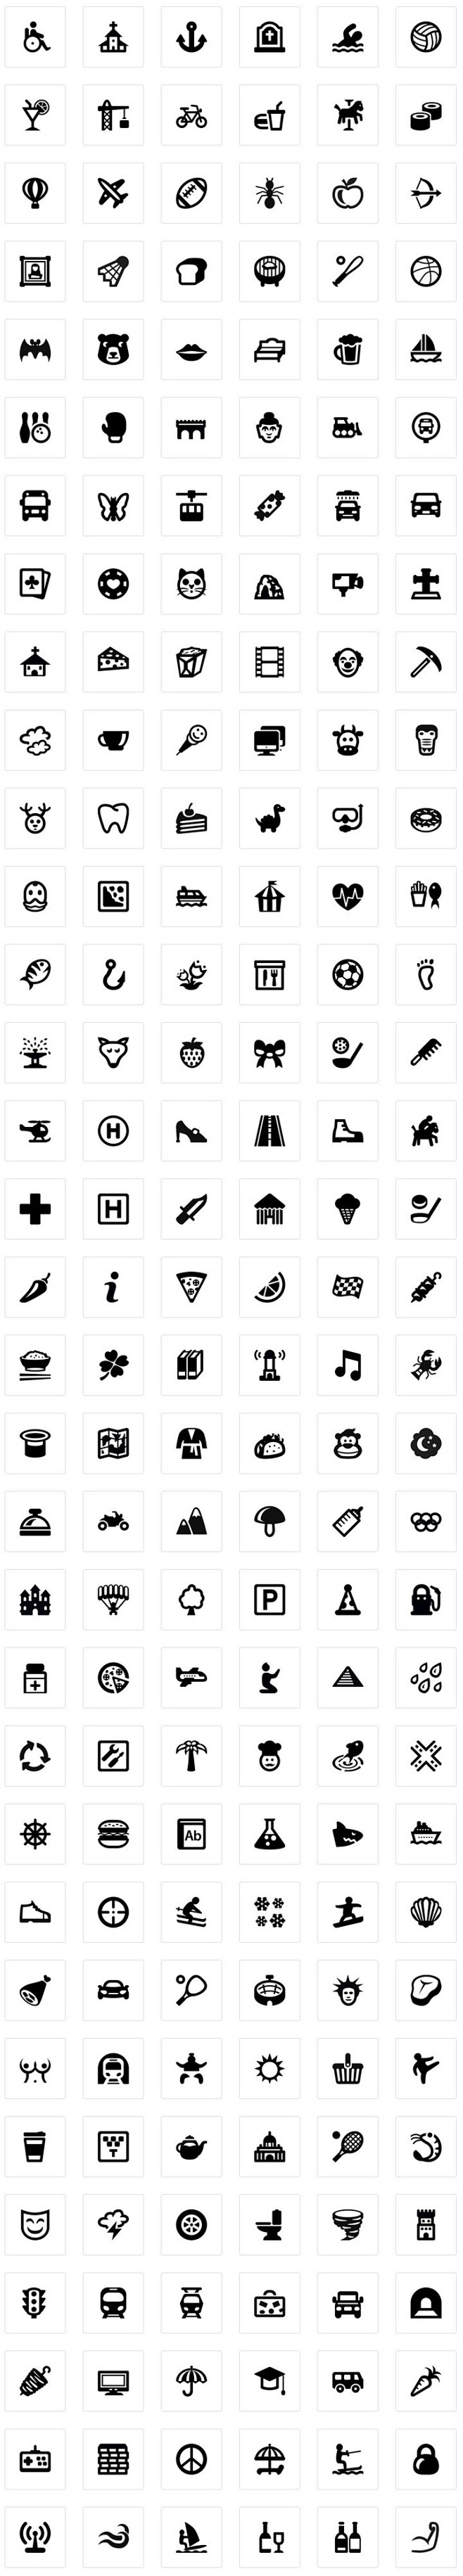 MAP ICONS FOR GOOGLE...